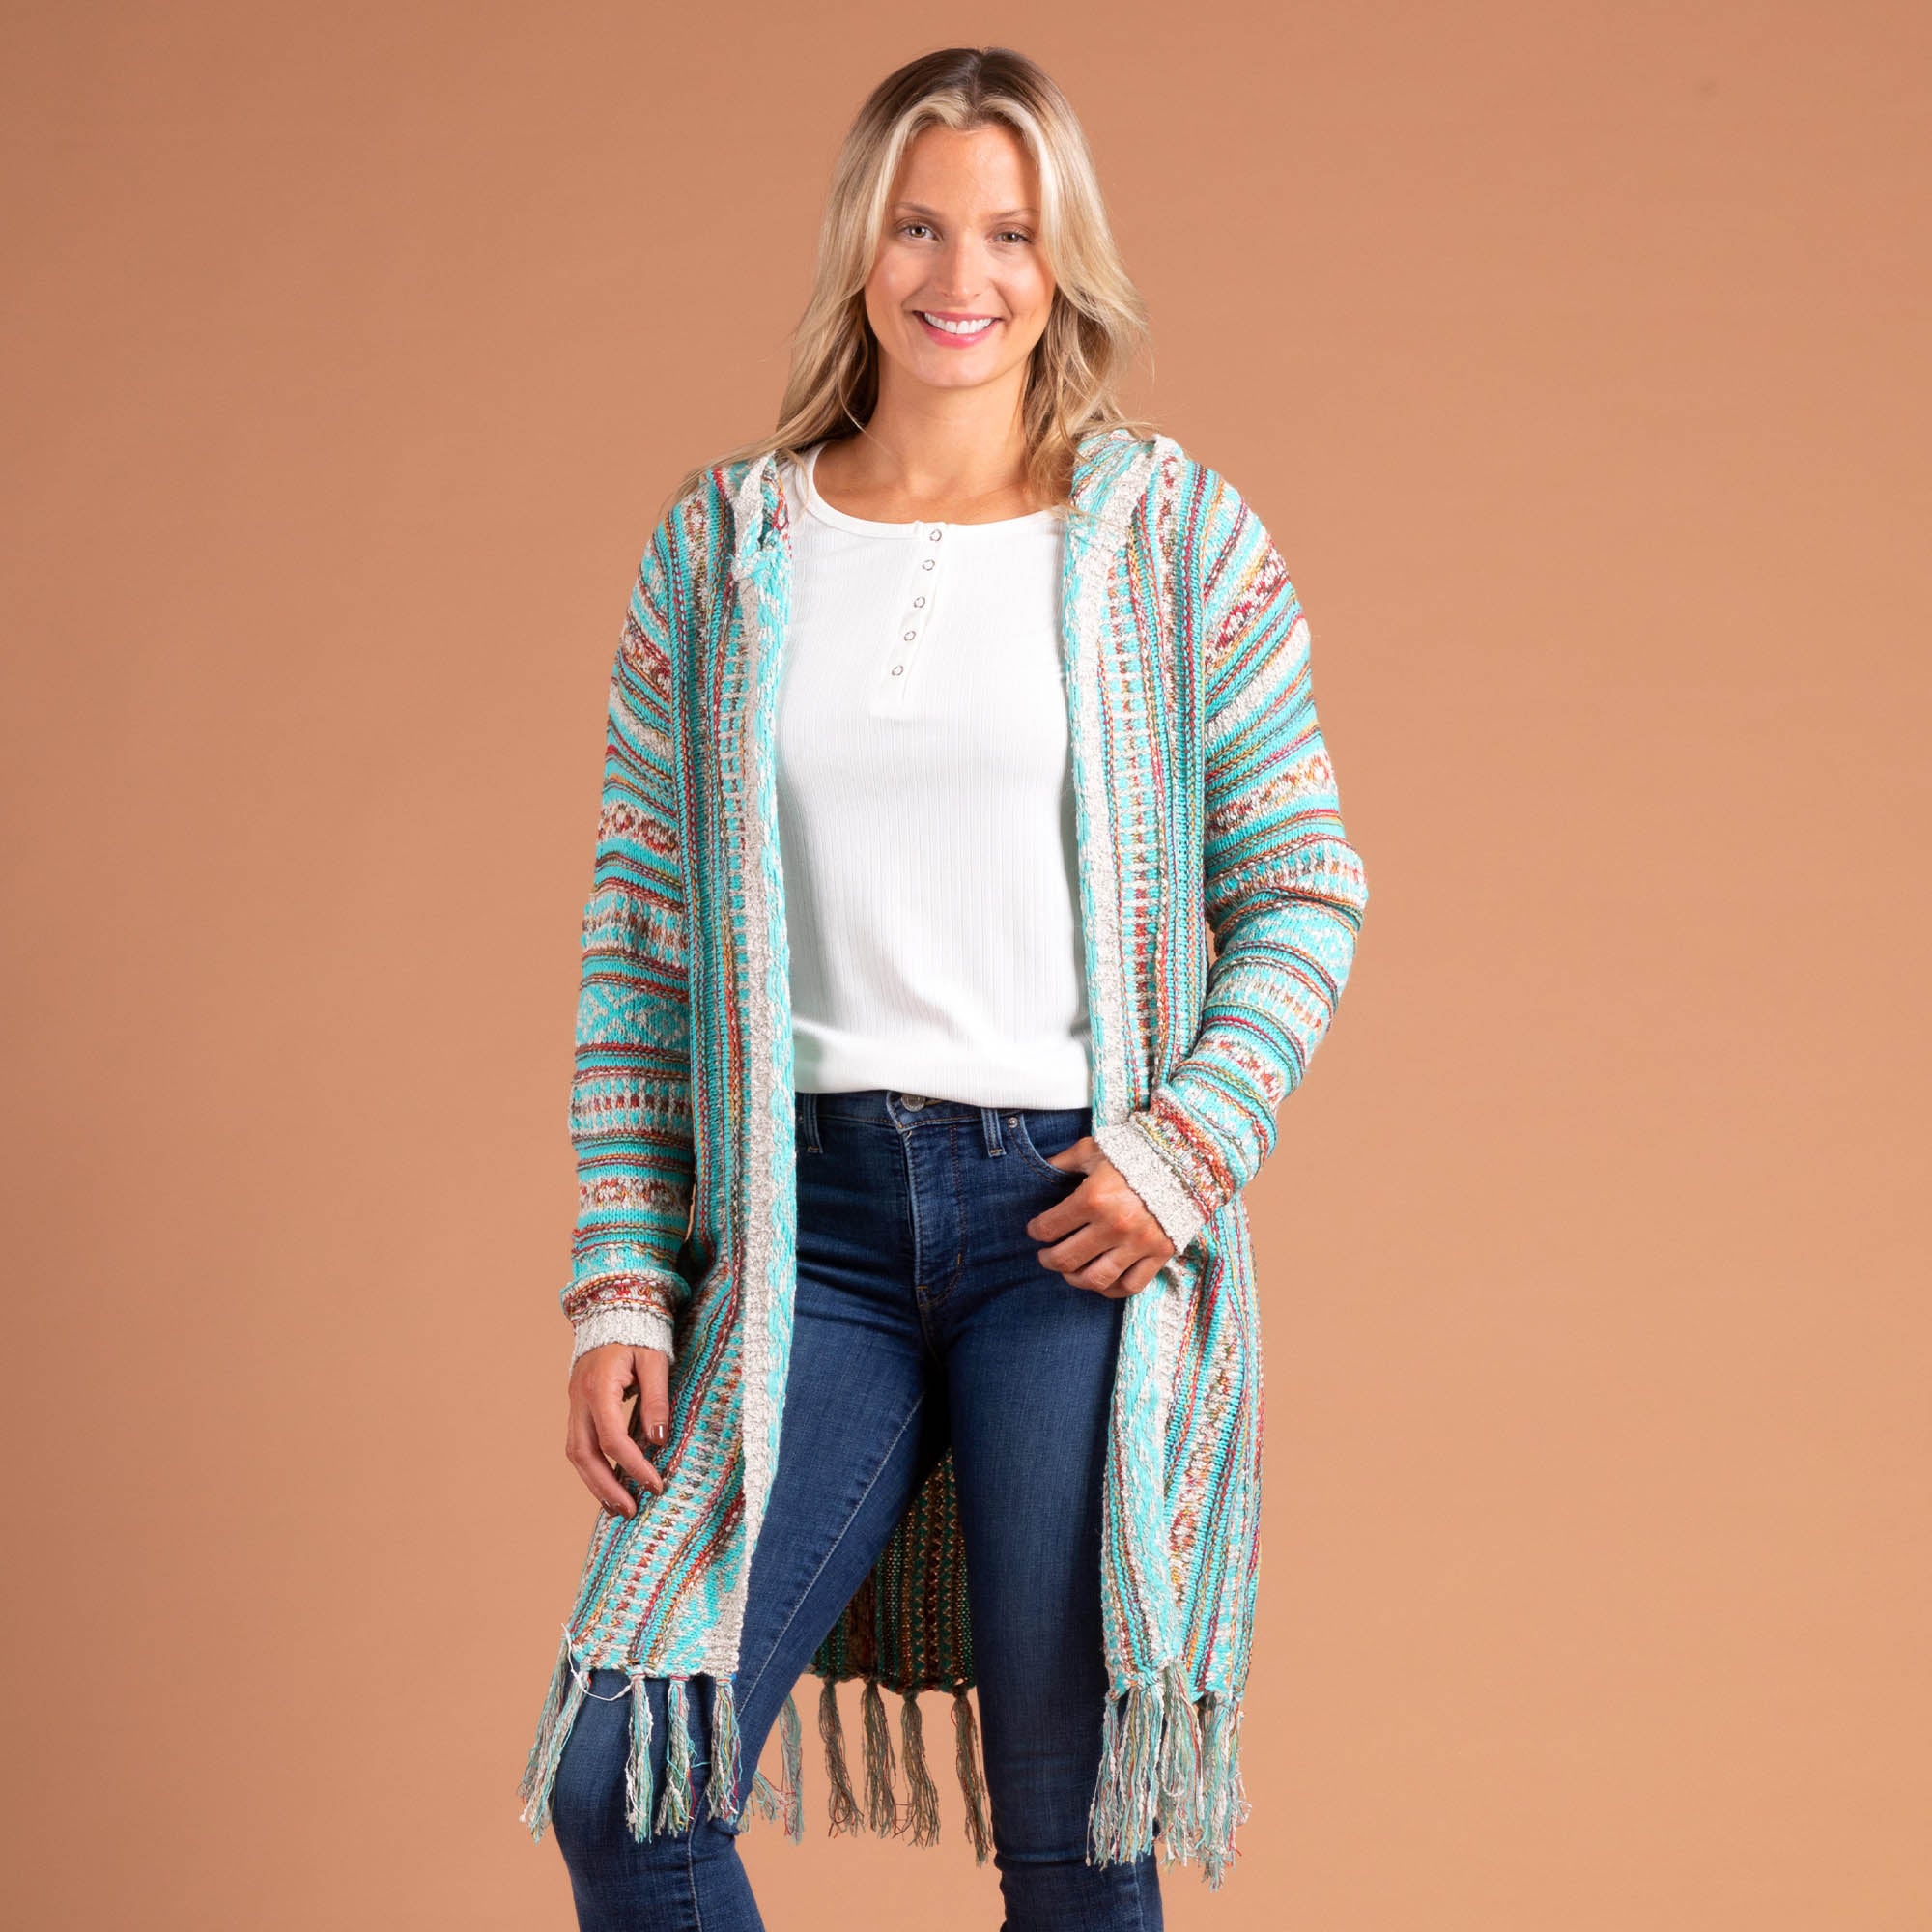 Striped Duster Cardigan With Fringe - Turquoise - S/M